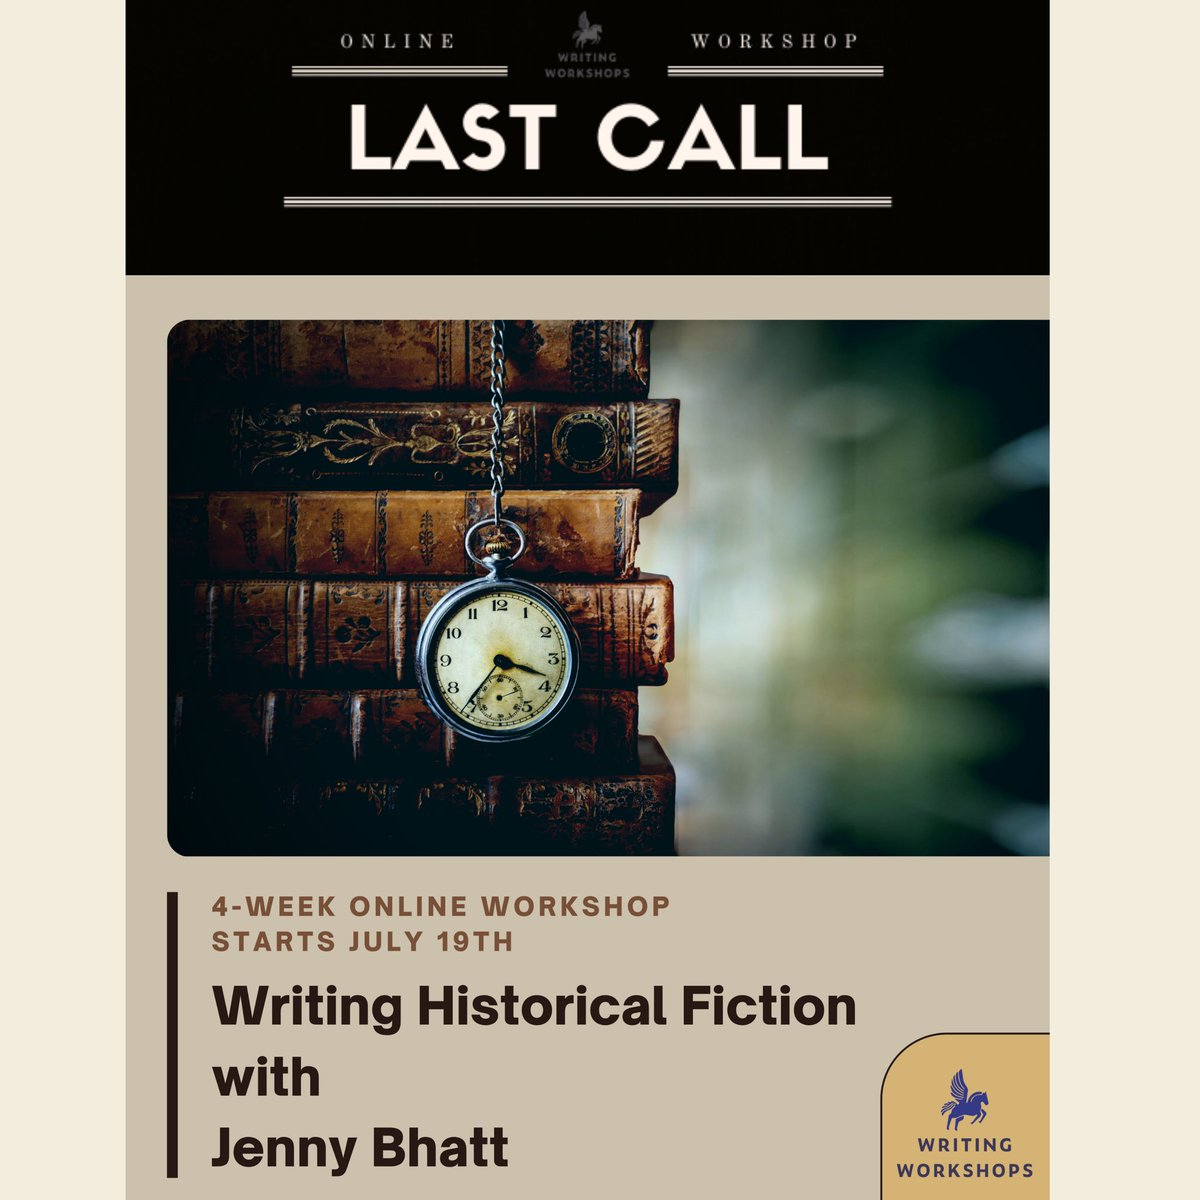 STARTS TODAY (7/19): Writing Historical Fiction 4-Week Online Workshop with Jenny Bhatt. Join us: 

https://t.co/6T1W7Uptxx https://t.co/2eXEOBqGCG